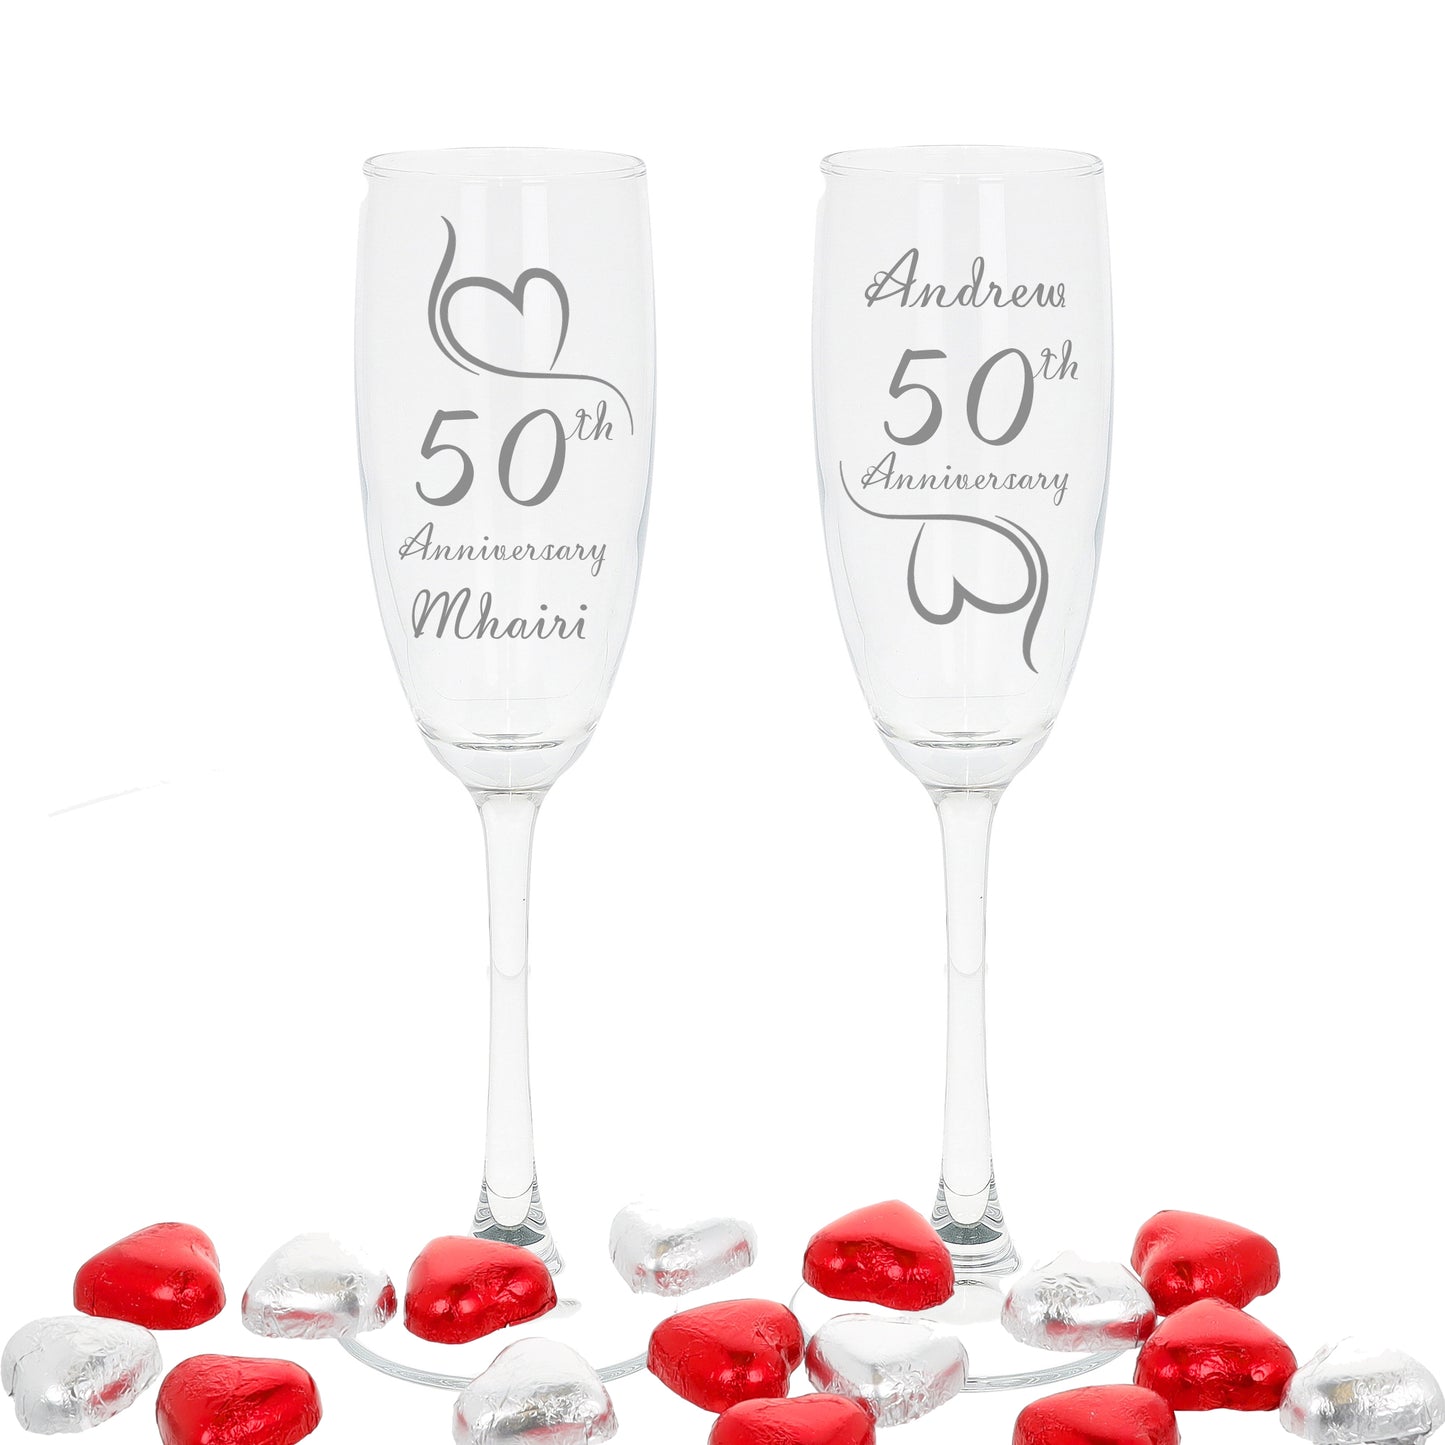 Engraved 50th Gold Wedding Anniversary Personalised Engraved Champagne Glass Gift Set  - Always Looking Good -   